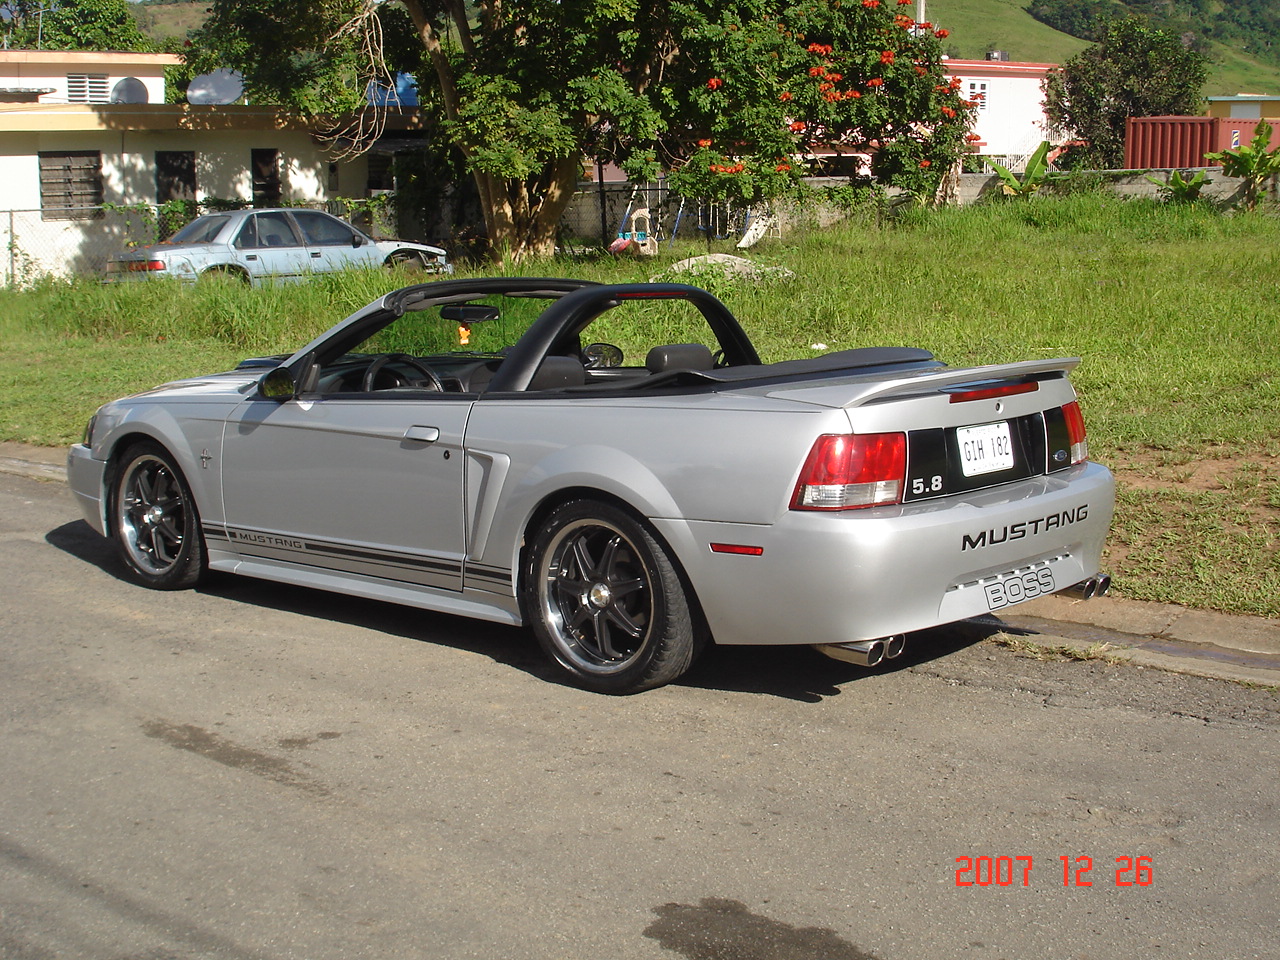 2000 Ford mustang gt convertible specs #1